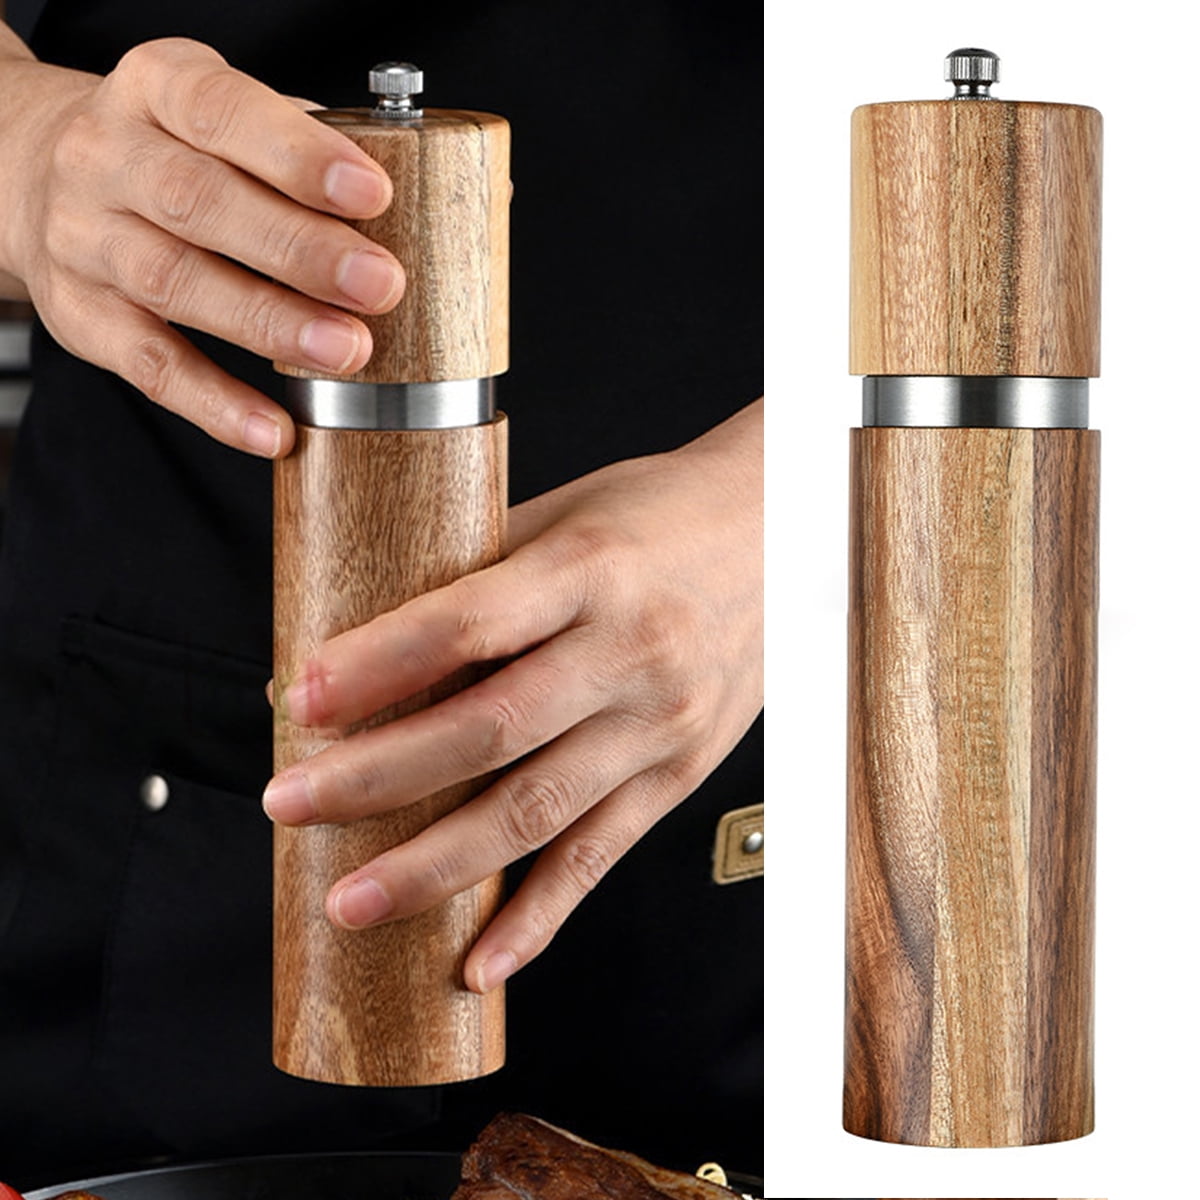 Salt and Pepper Grinder Set with Wood Tray, Manual Sea Salt, Spice and Peppercorn Mill, Glass Container, Stainless Steel Cap, Adjustable Coarseness